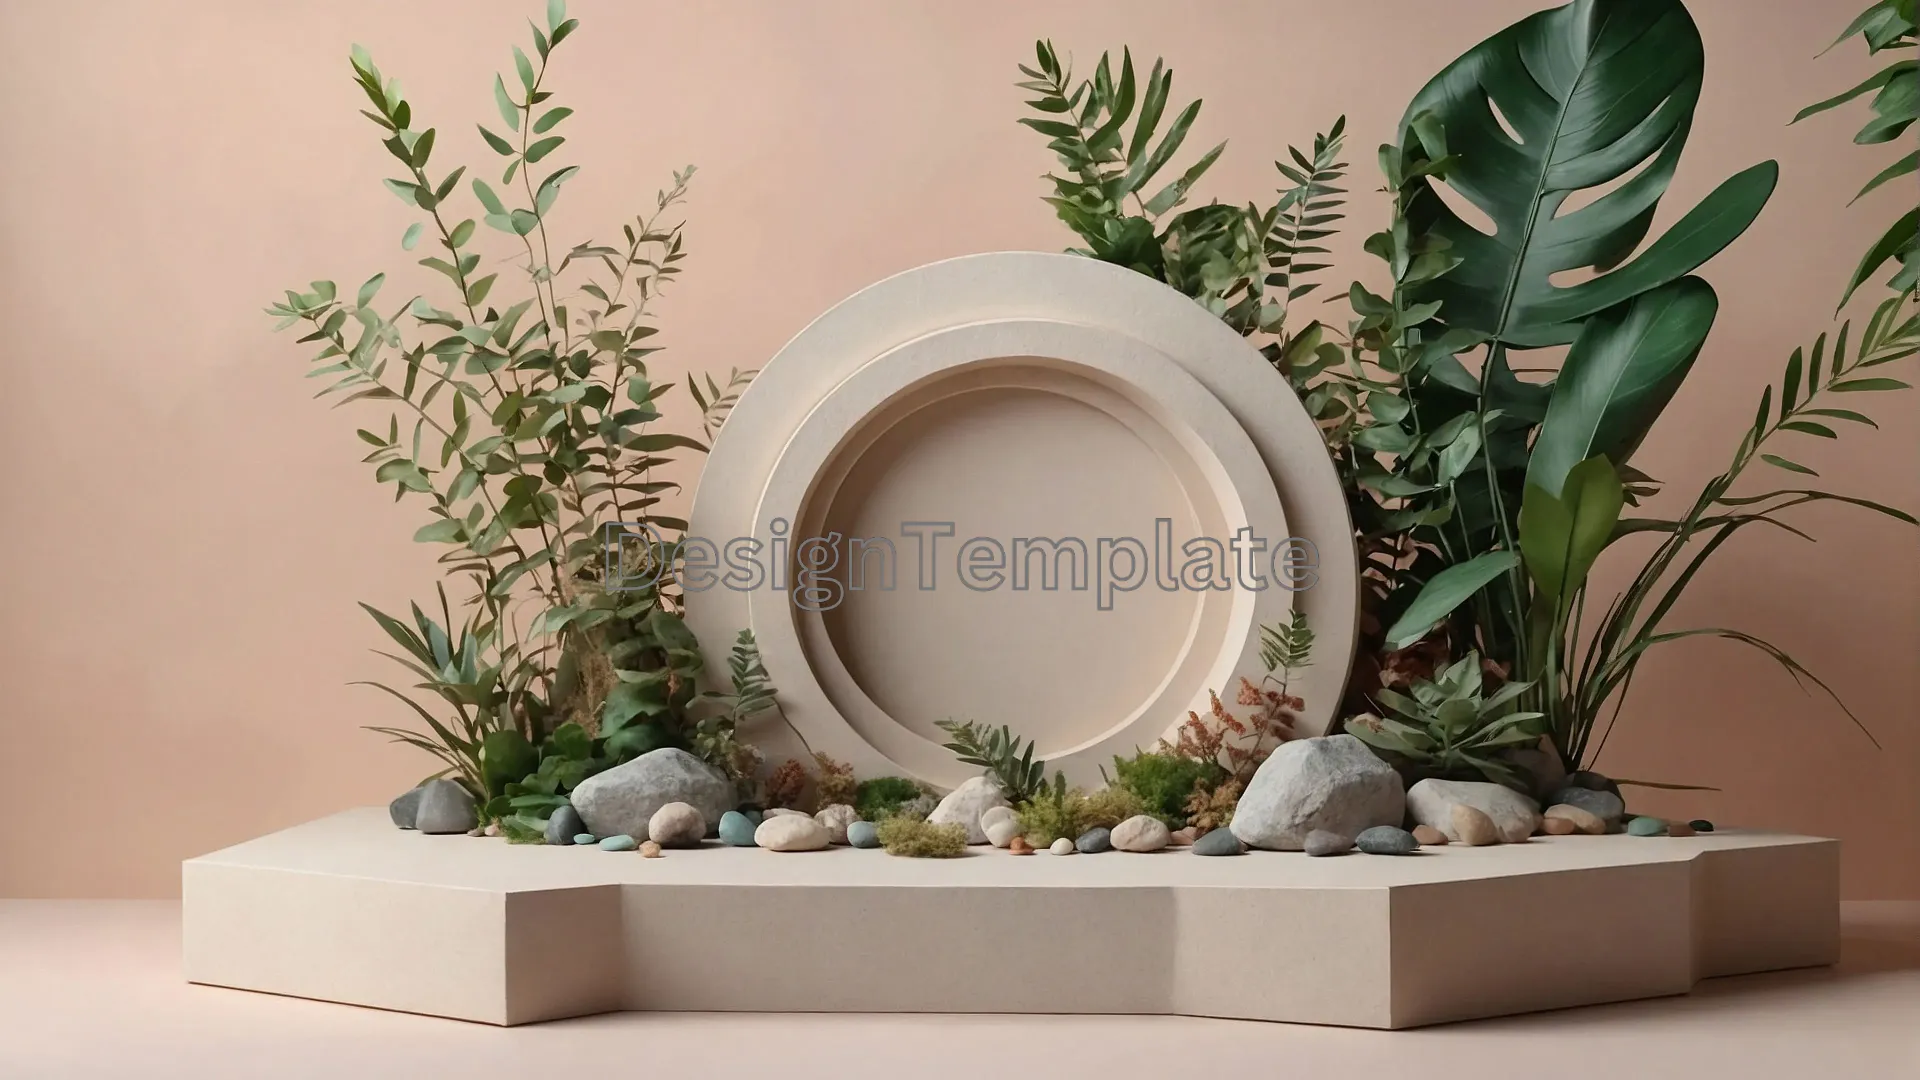 Natural Plant Frame Texture Background